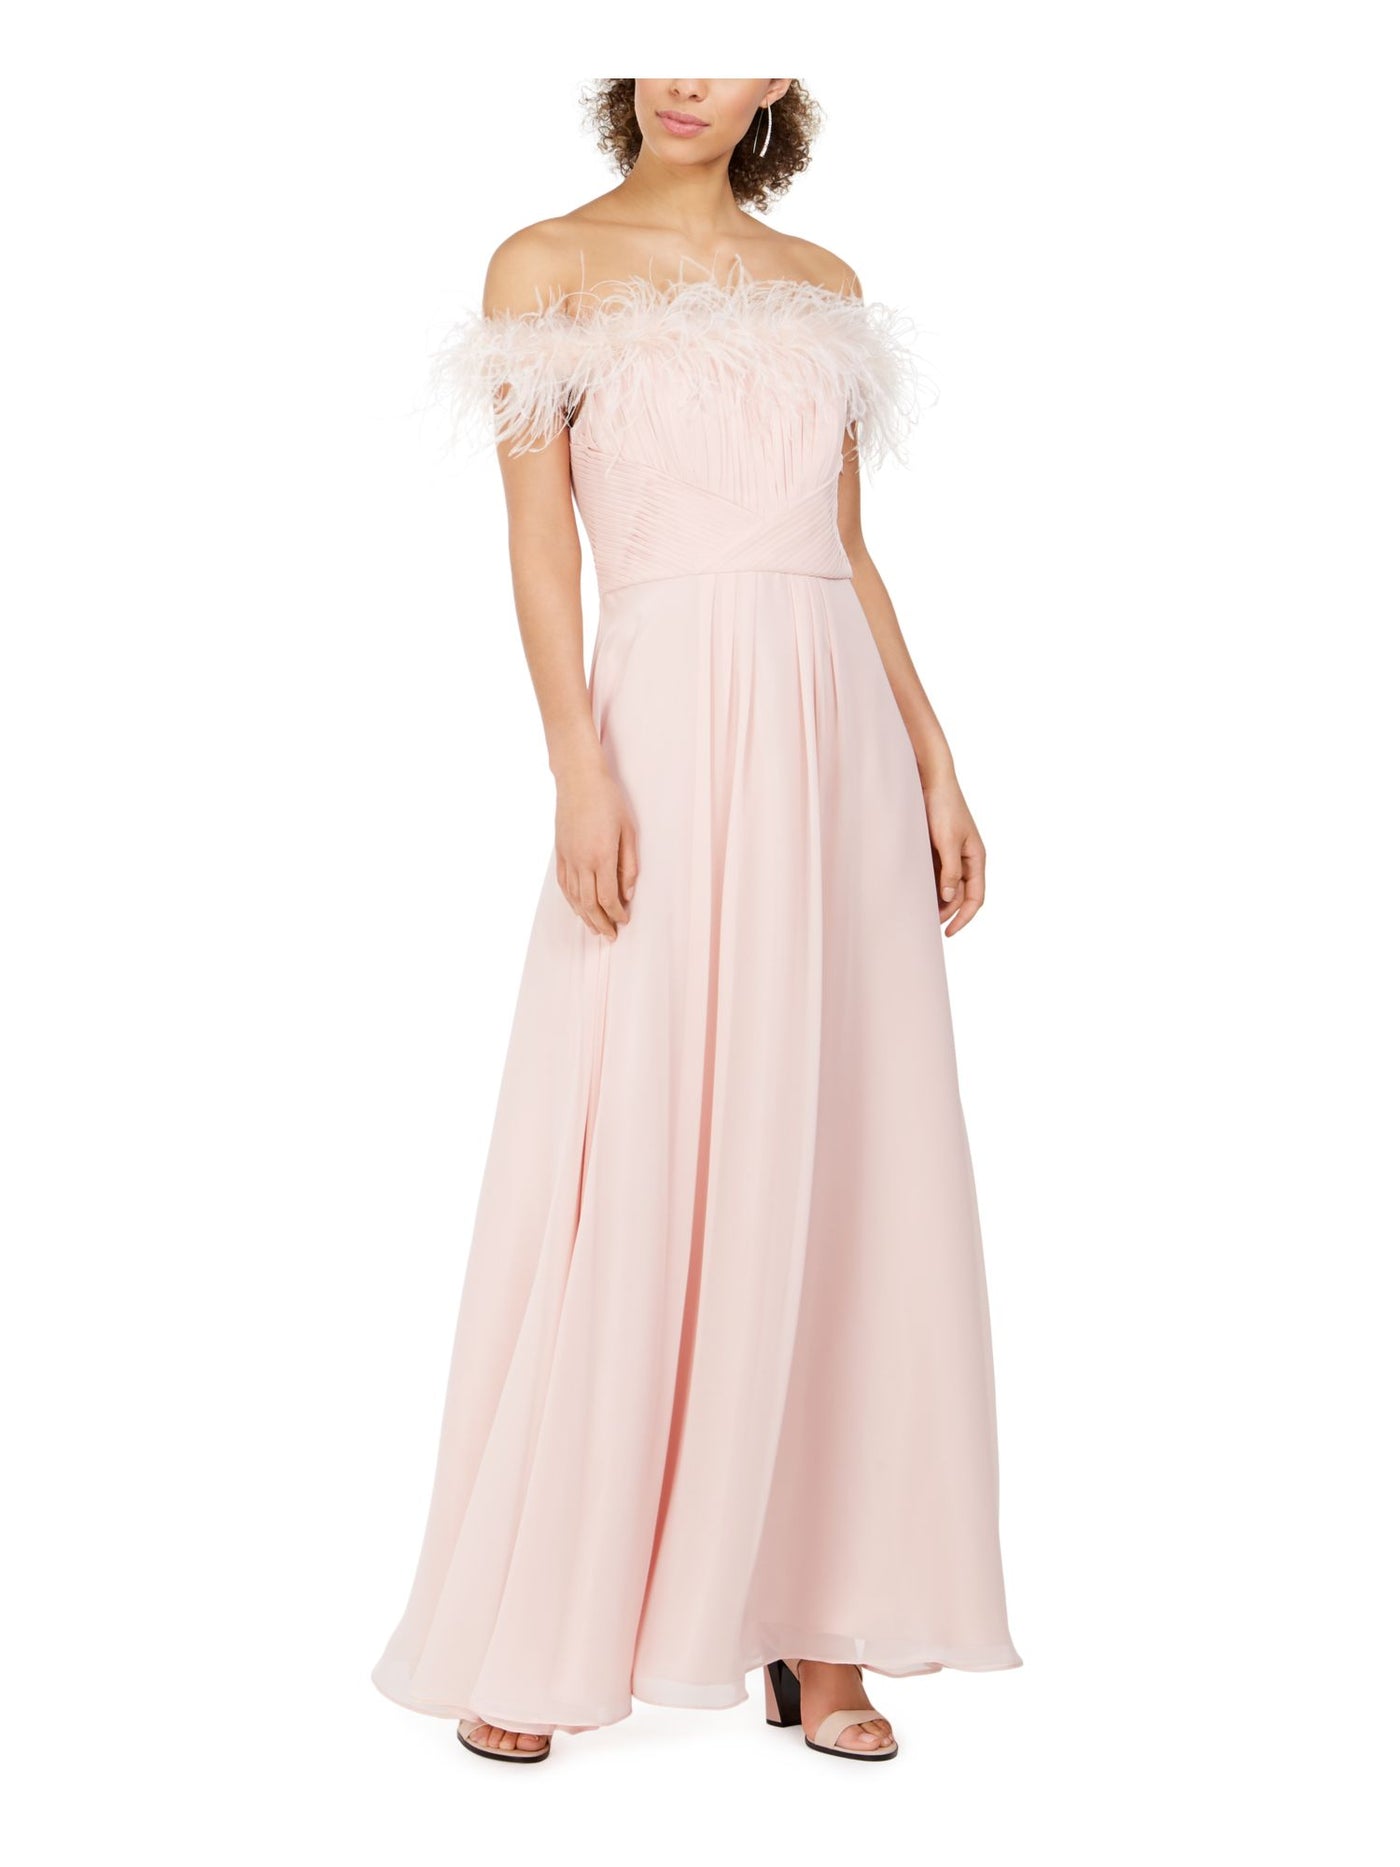 ELIZA J Womens Pleated Zippered Faux-feathered Gown Off Shoulder Full-Length Formal Dress